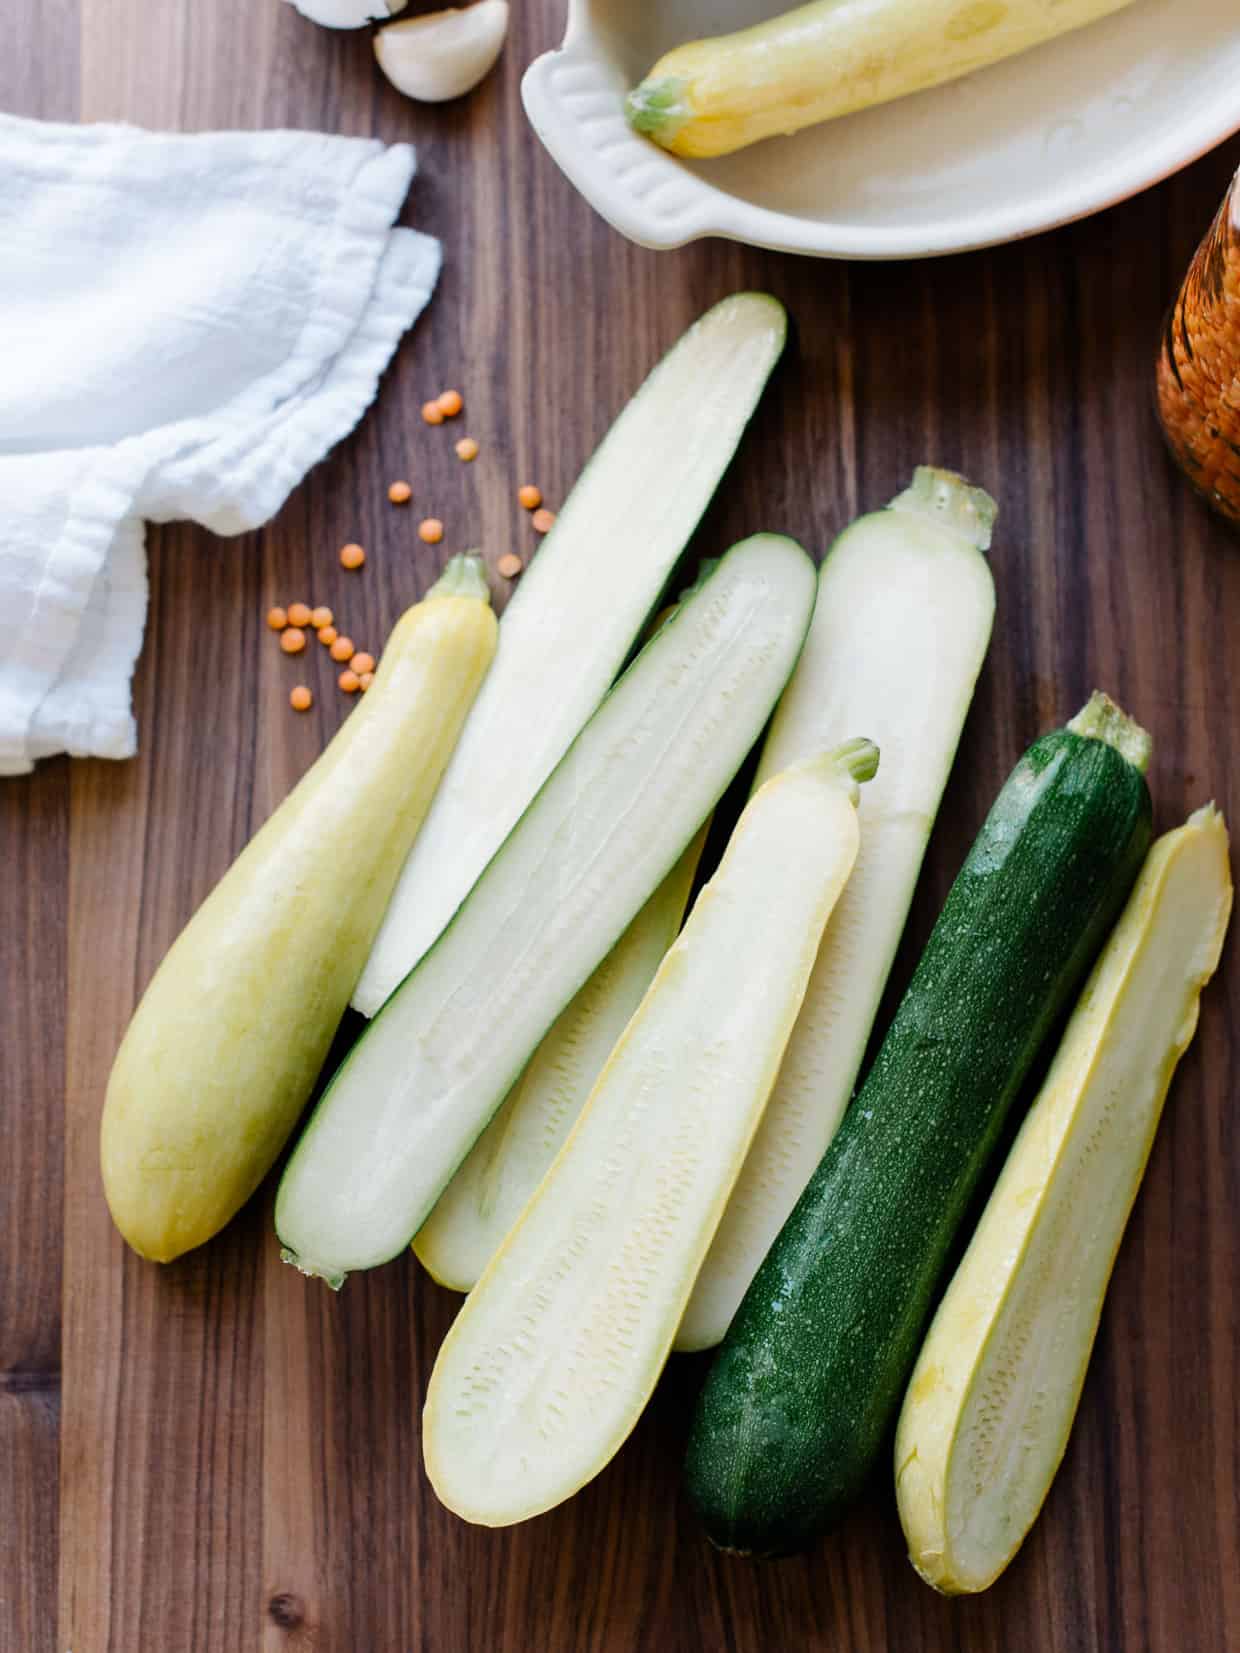 Zucchini and summer squash sliced lengthwise on a wooden cutting board.